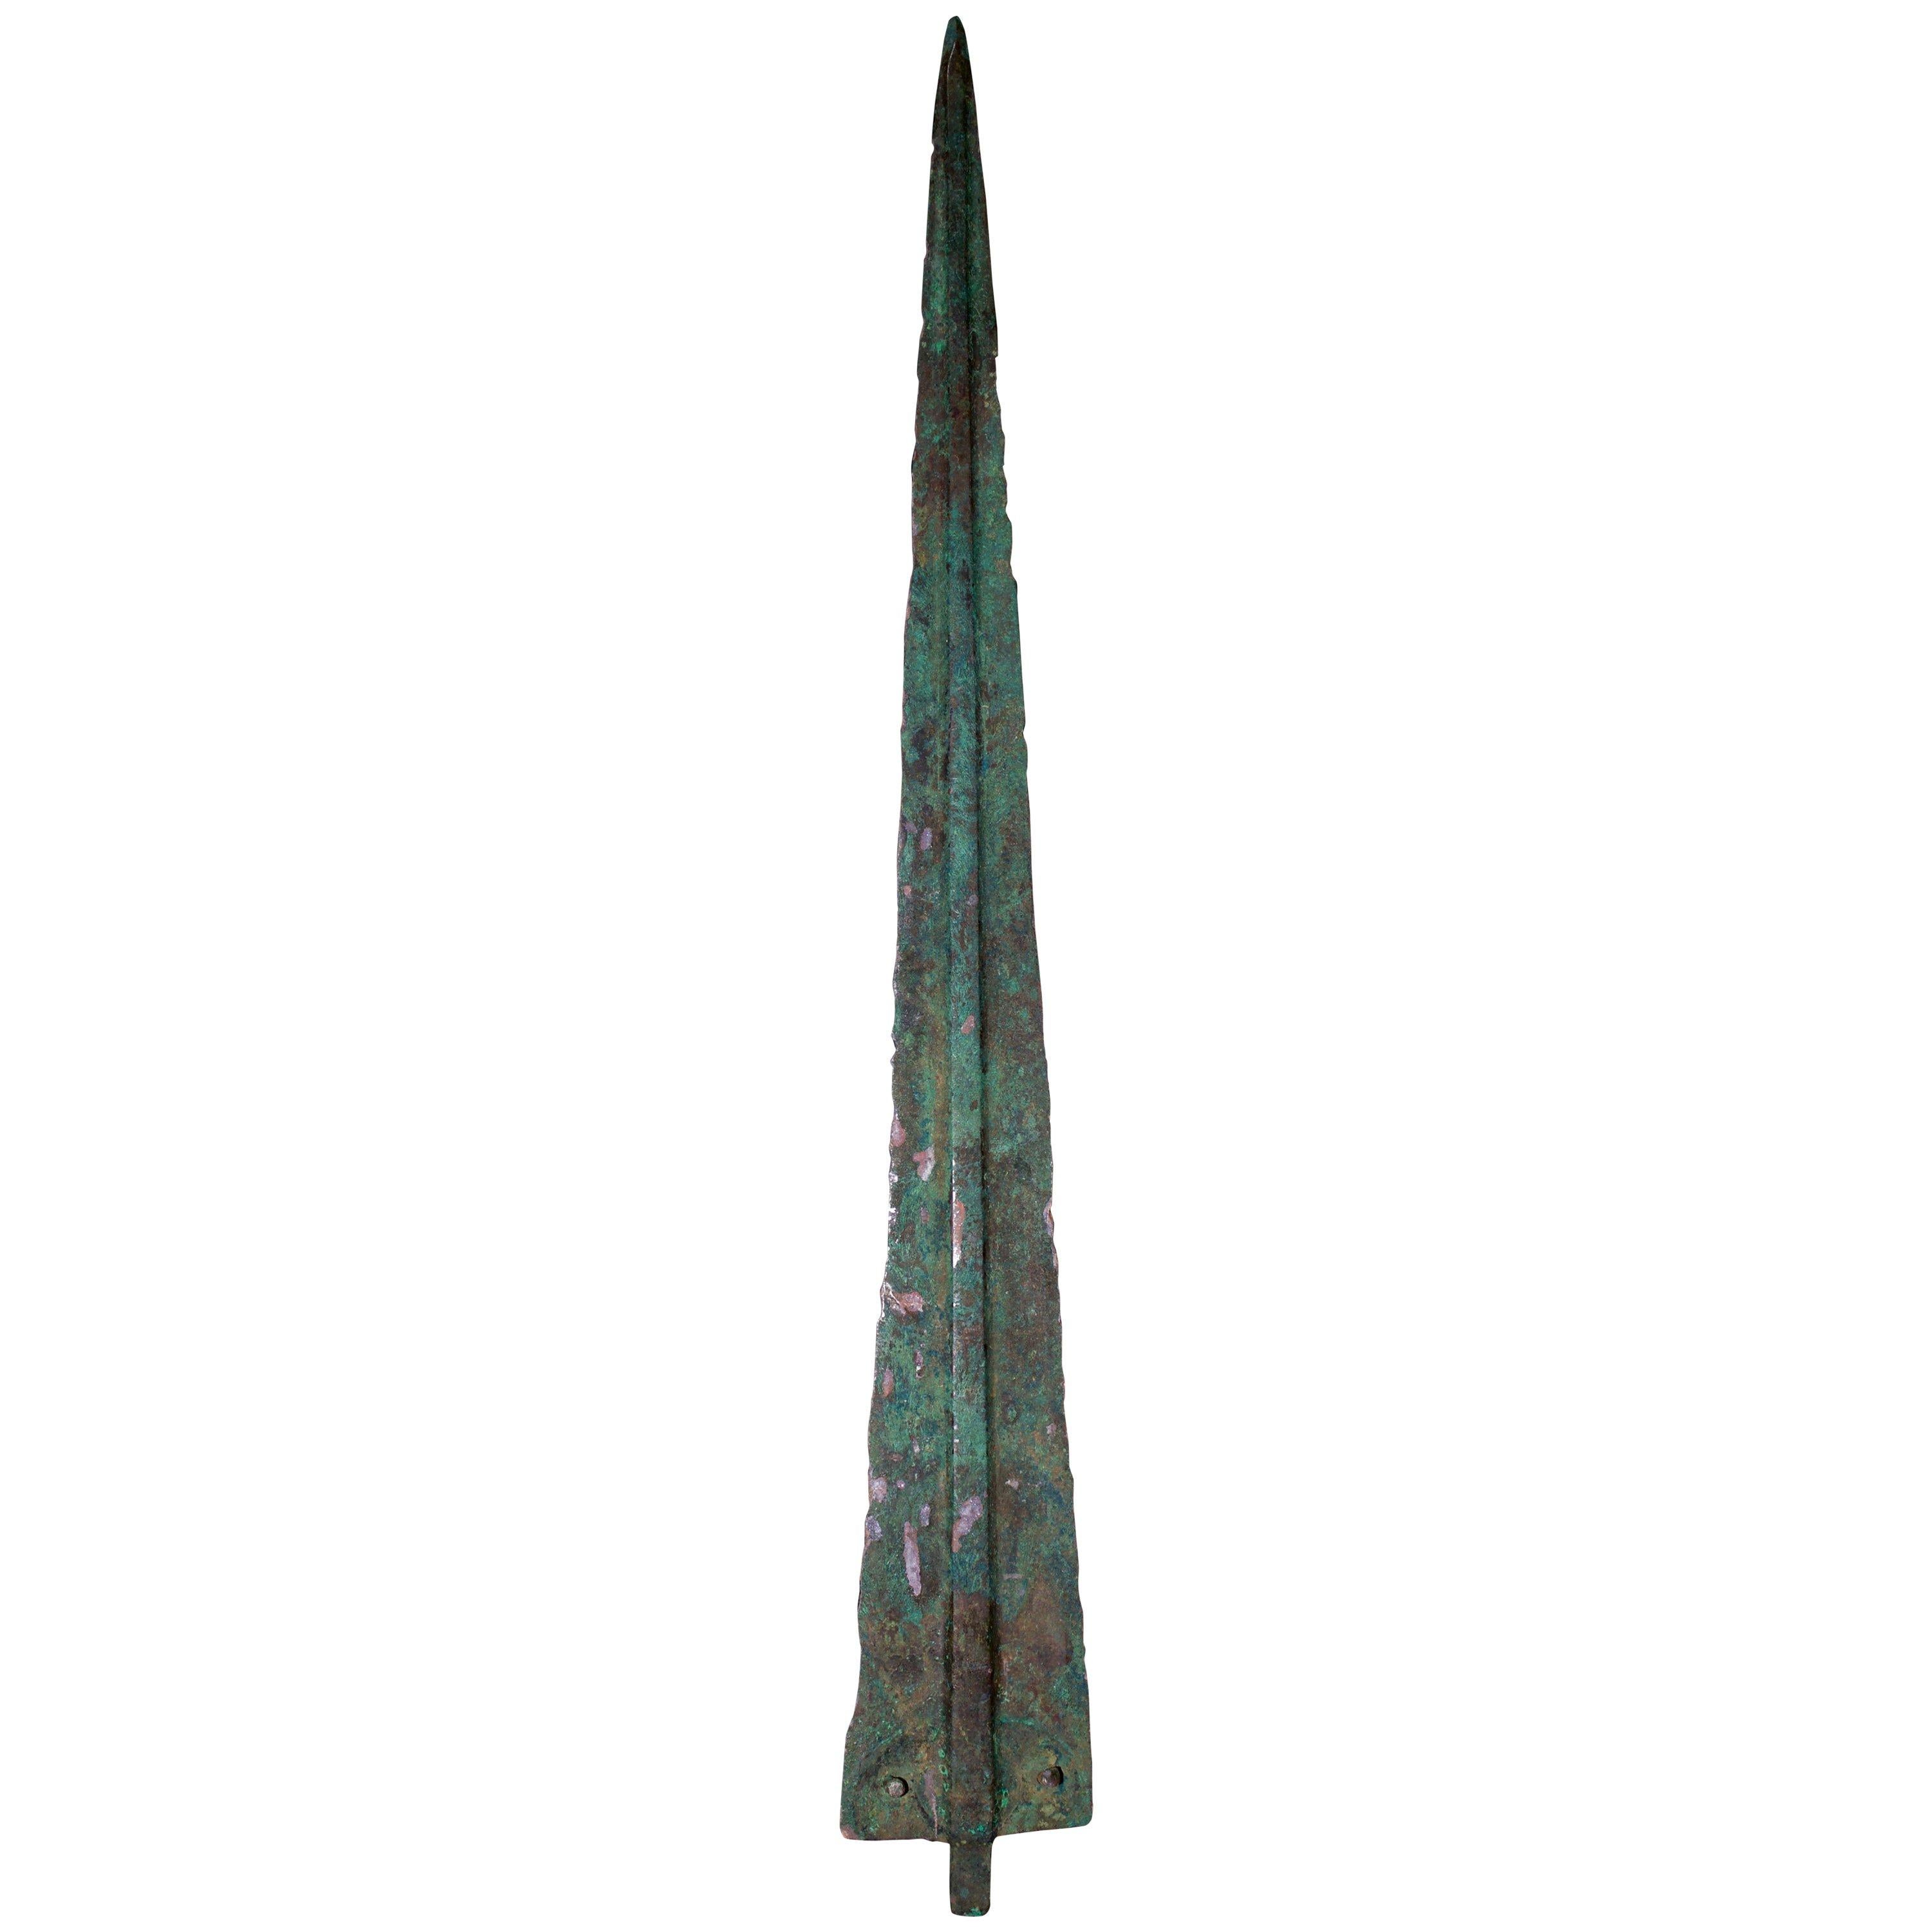 Persian Luristan Bronze Spear Head // Early Iron Age Weapon